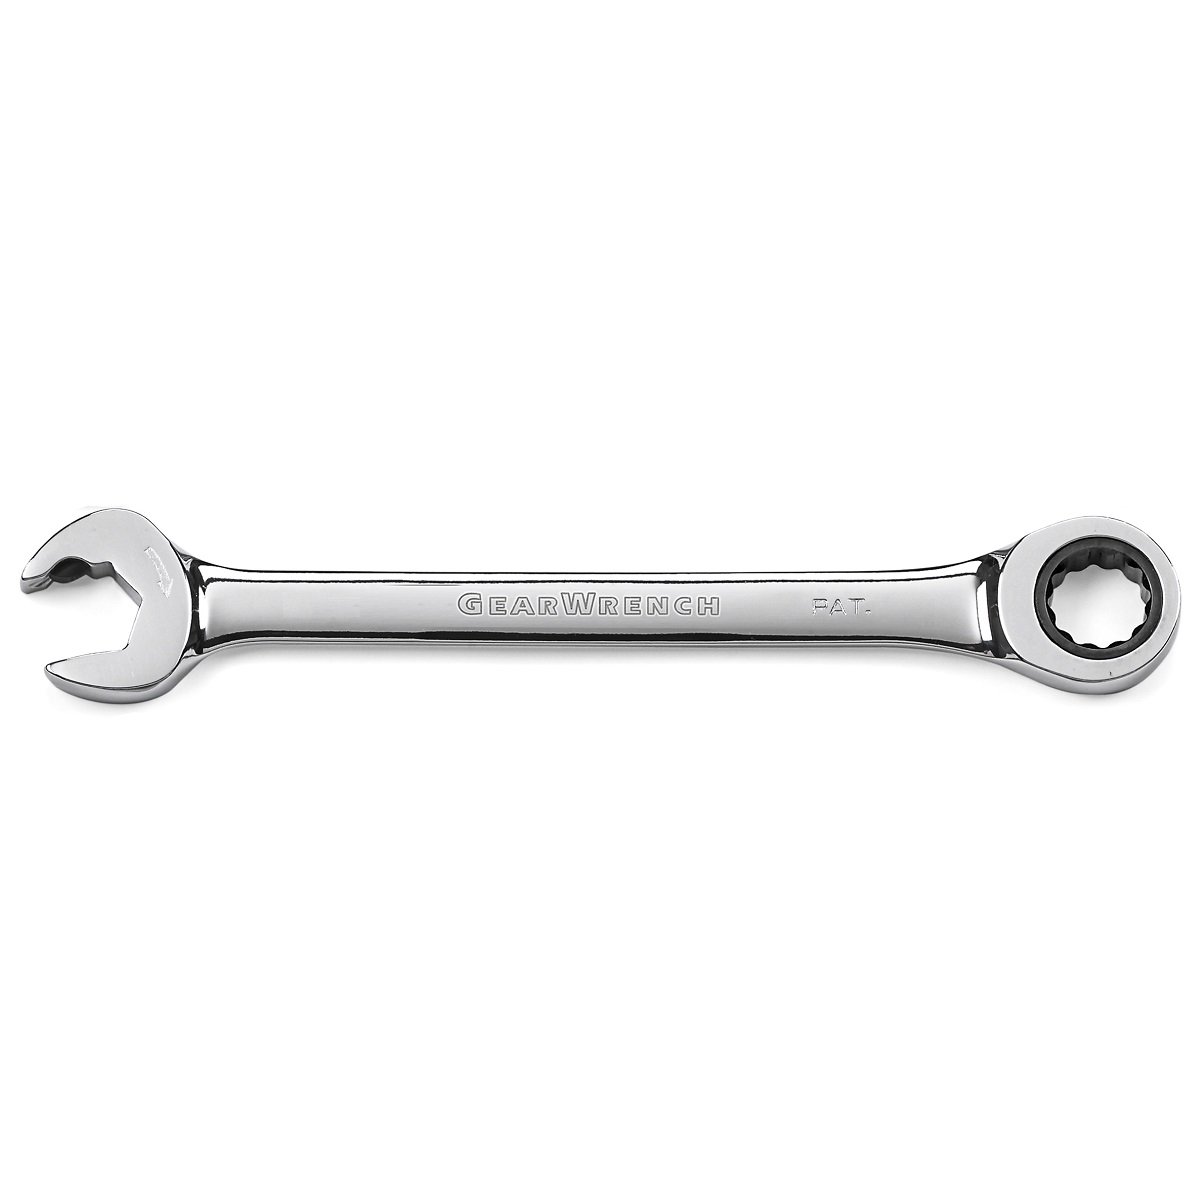 GearWrench Ratcheting Open End Combination Spanner Wrench 15mm 85515